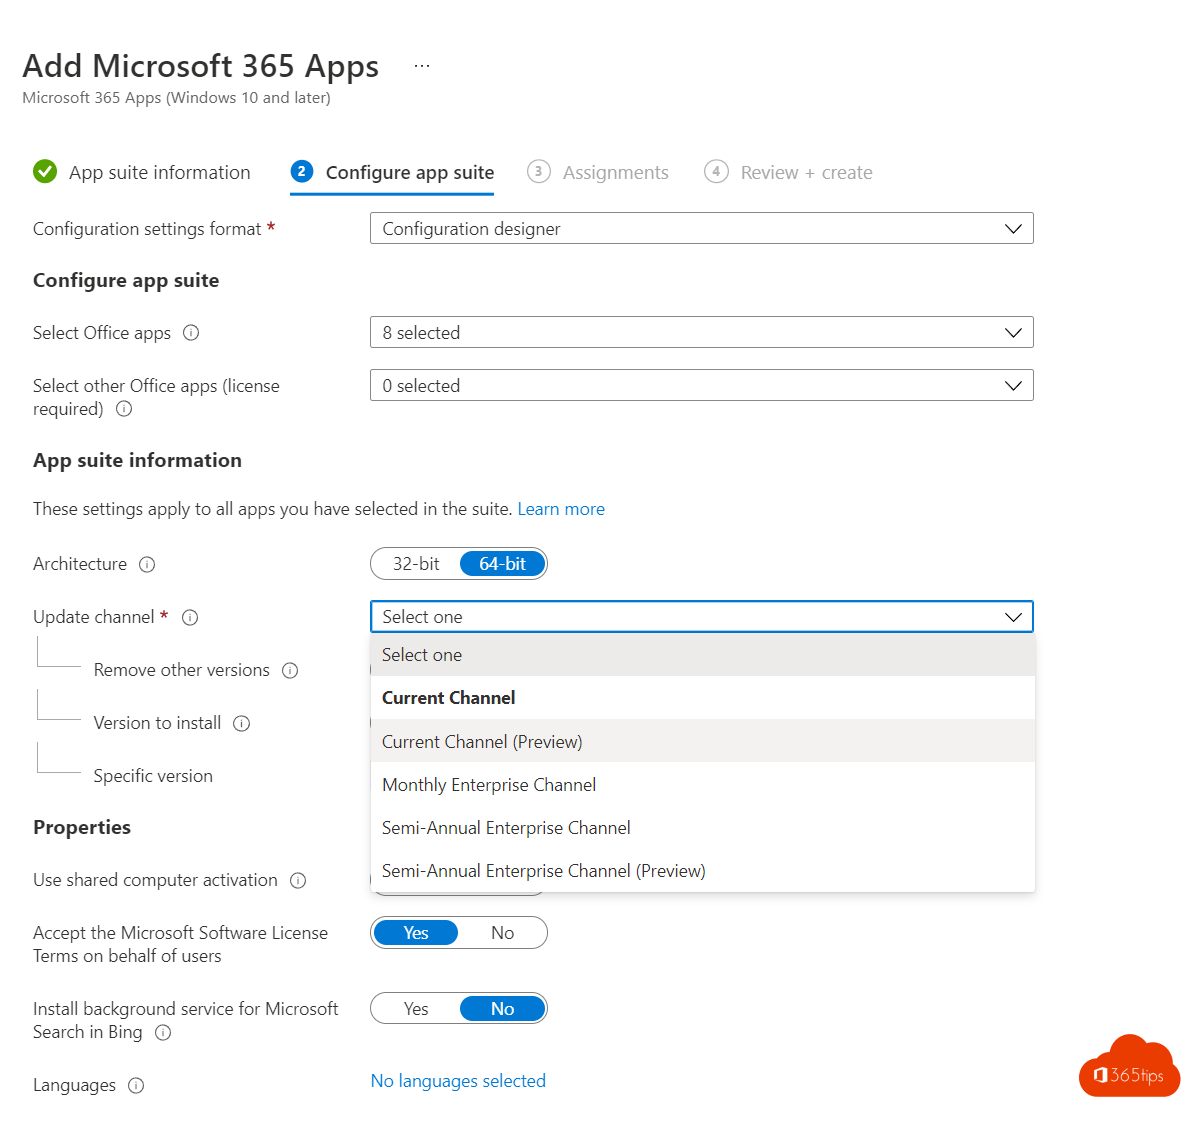 Deploy Microsoft 365 Apps with Endpoint manager in 8 steps